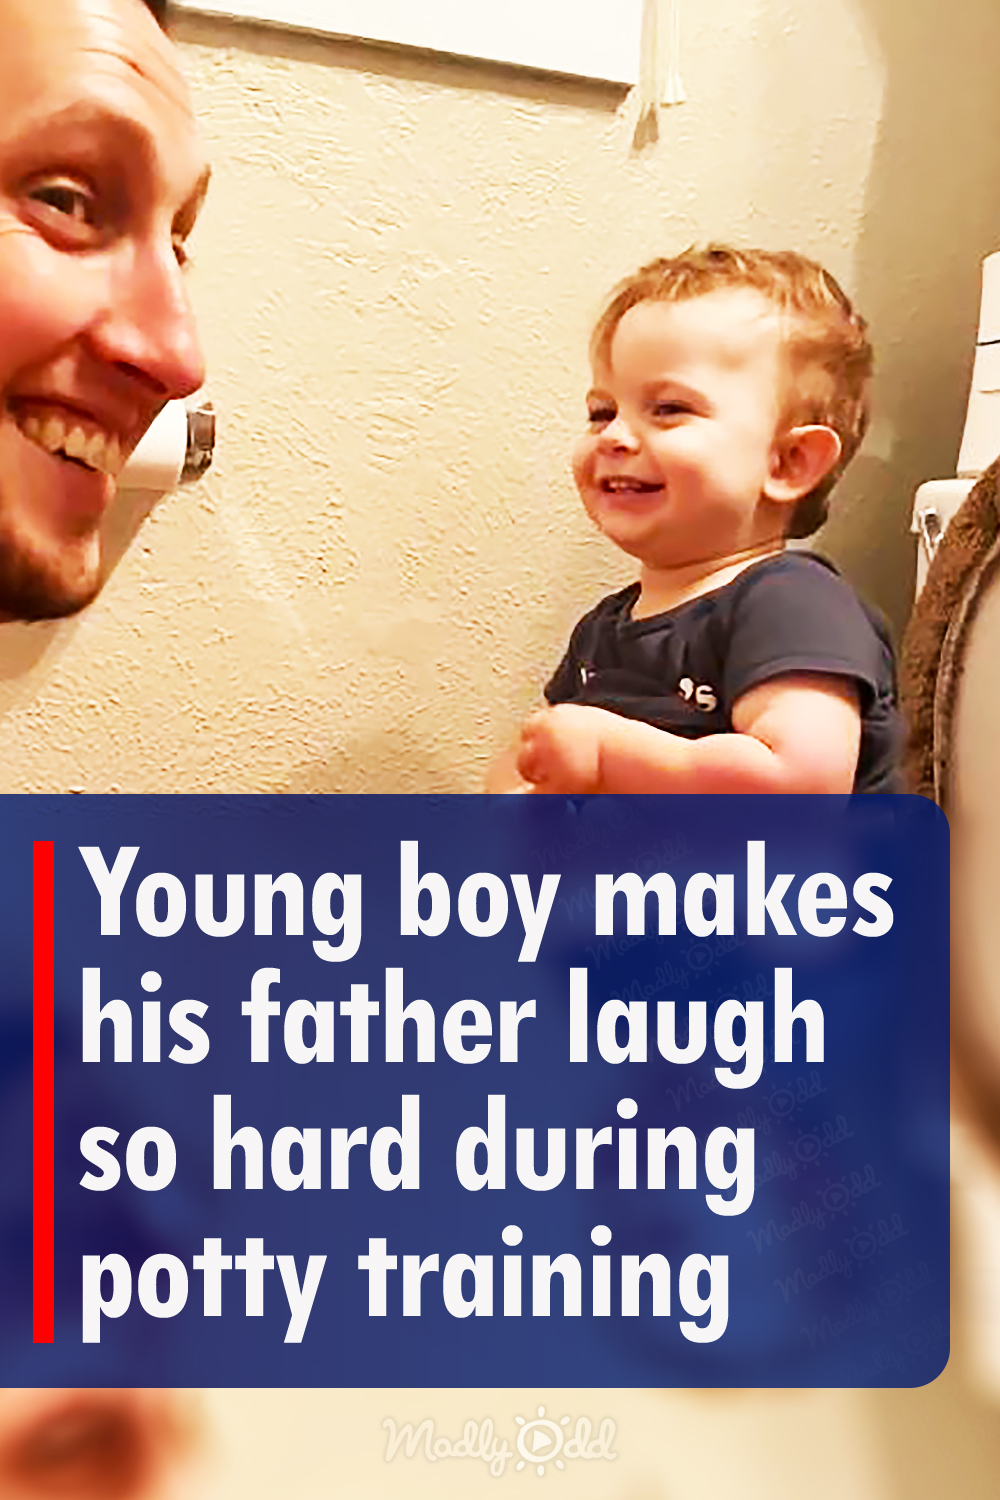 Young boy makes his father laugh so hard during potty training